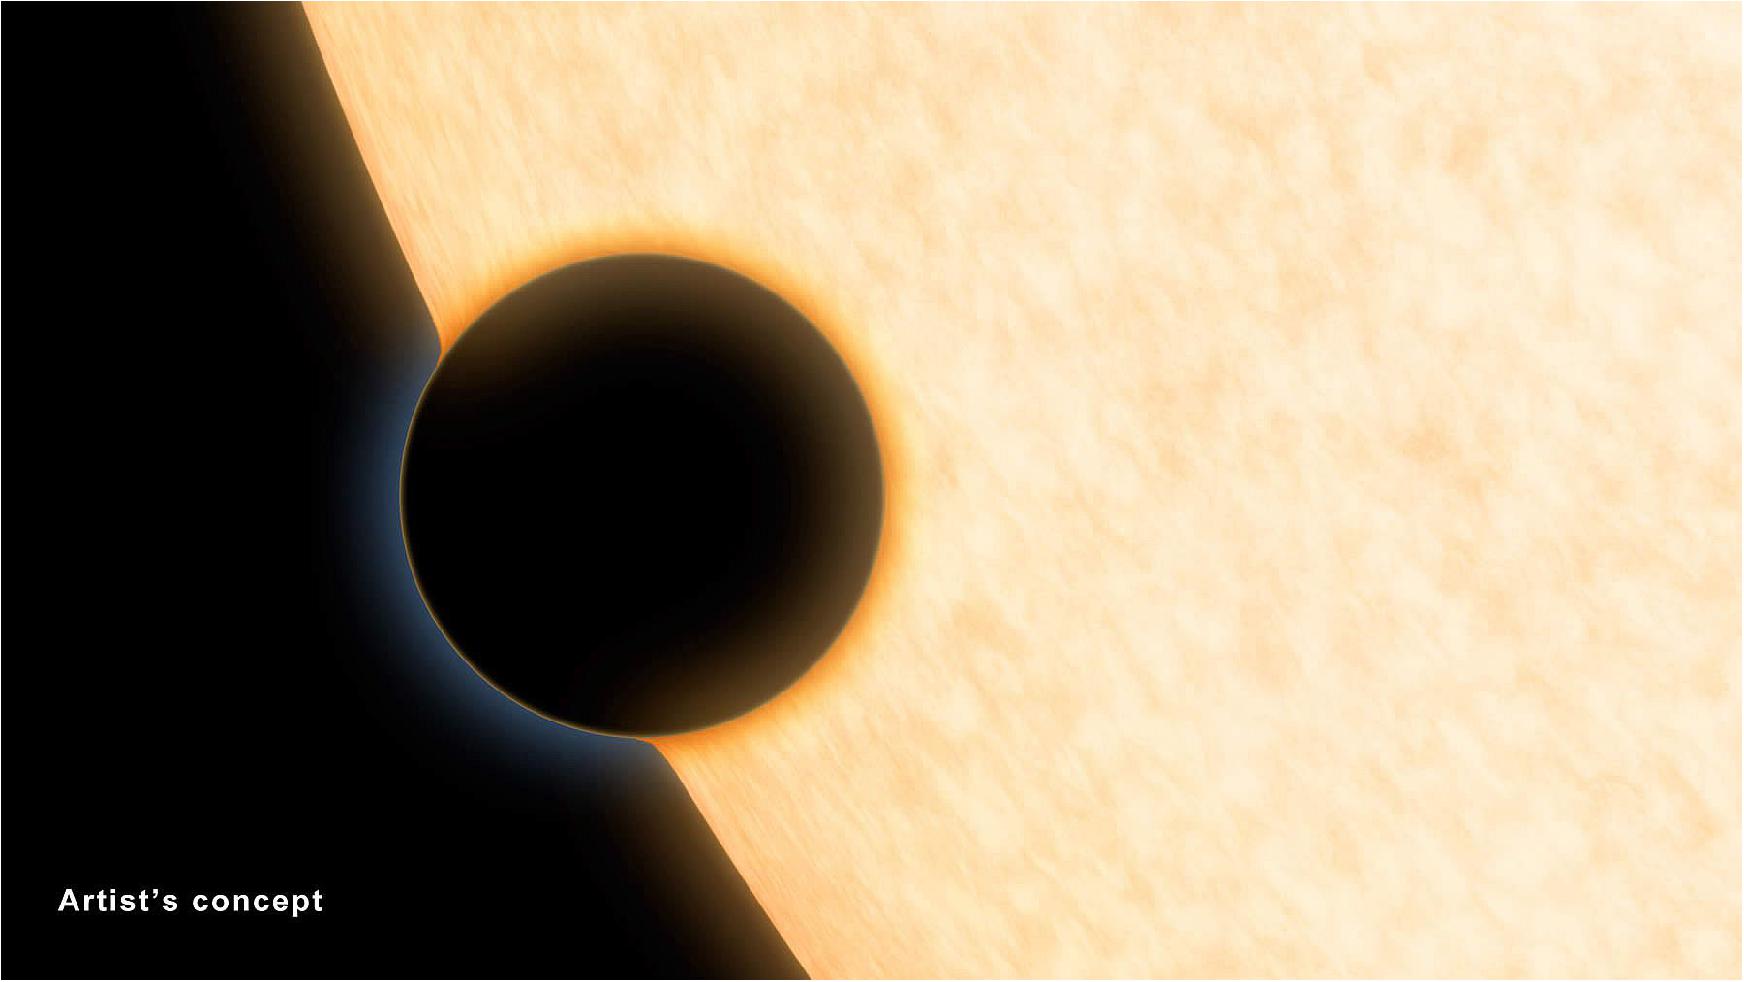 Figure 54: Seeing starlight through a planet's rim: A Neptune-size planet with a clear atmosphere is shown crossing in front of its star in this artist's depiction. Such crossings, or transits, are observed by telescopes like NASA's Hubble and Spitzer to glean information about planets' atmospheres. As starlight passes through a planet's atmosphere, atoms and molecules absorb light at certain wavelengths, blocking it from the telescope's view. The more light a planet blocks, the larger the planet appears. By analyzing the amount of light blocked by the planet at different wavelengths, researchers can determine which molecules make up the atmosphere (image credit: NASA/JPL-Caltech)